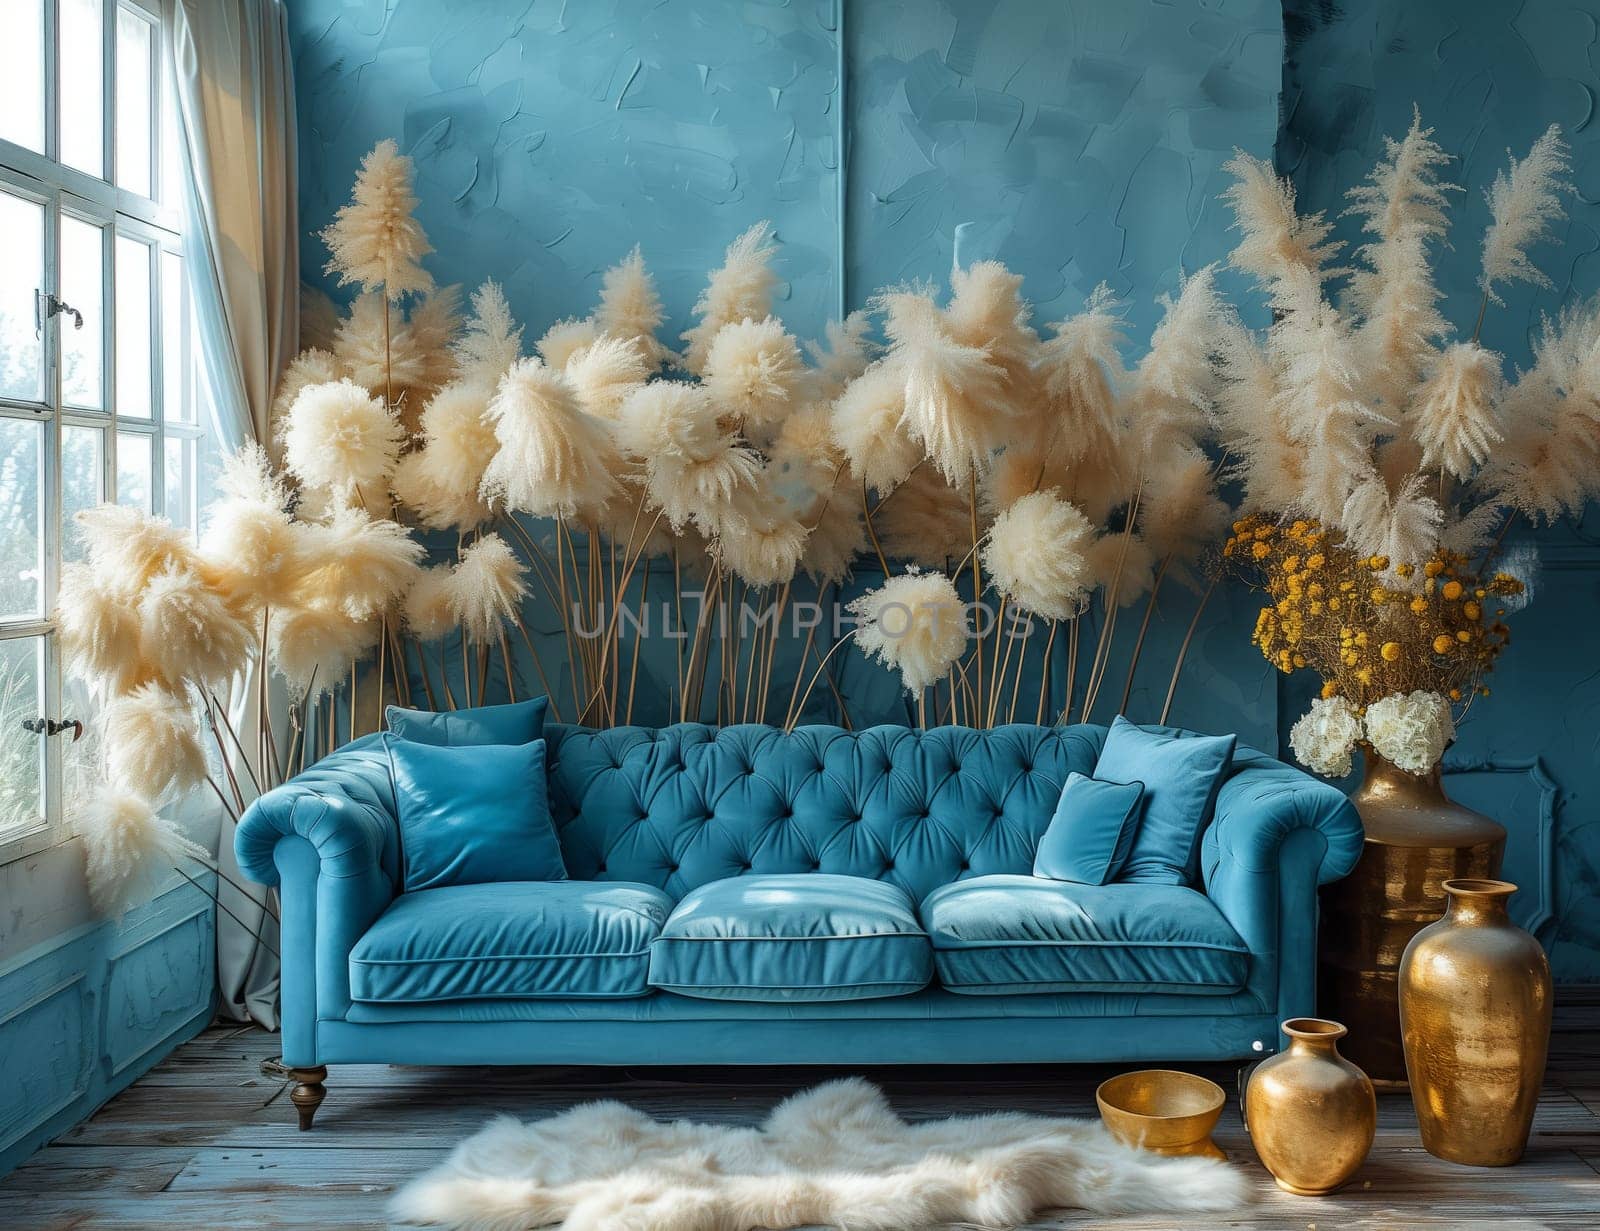 Azure studio couch, vases, and flowers in Aqua living room by richwolf